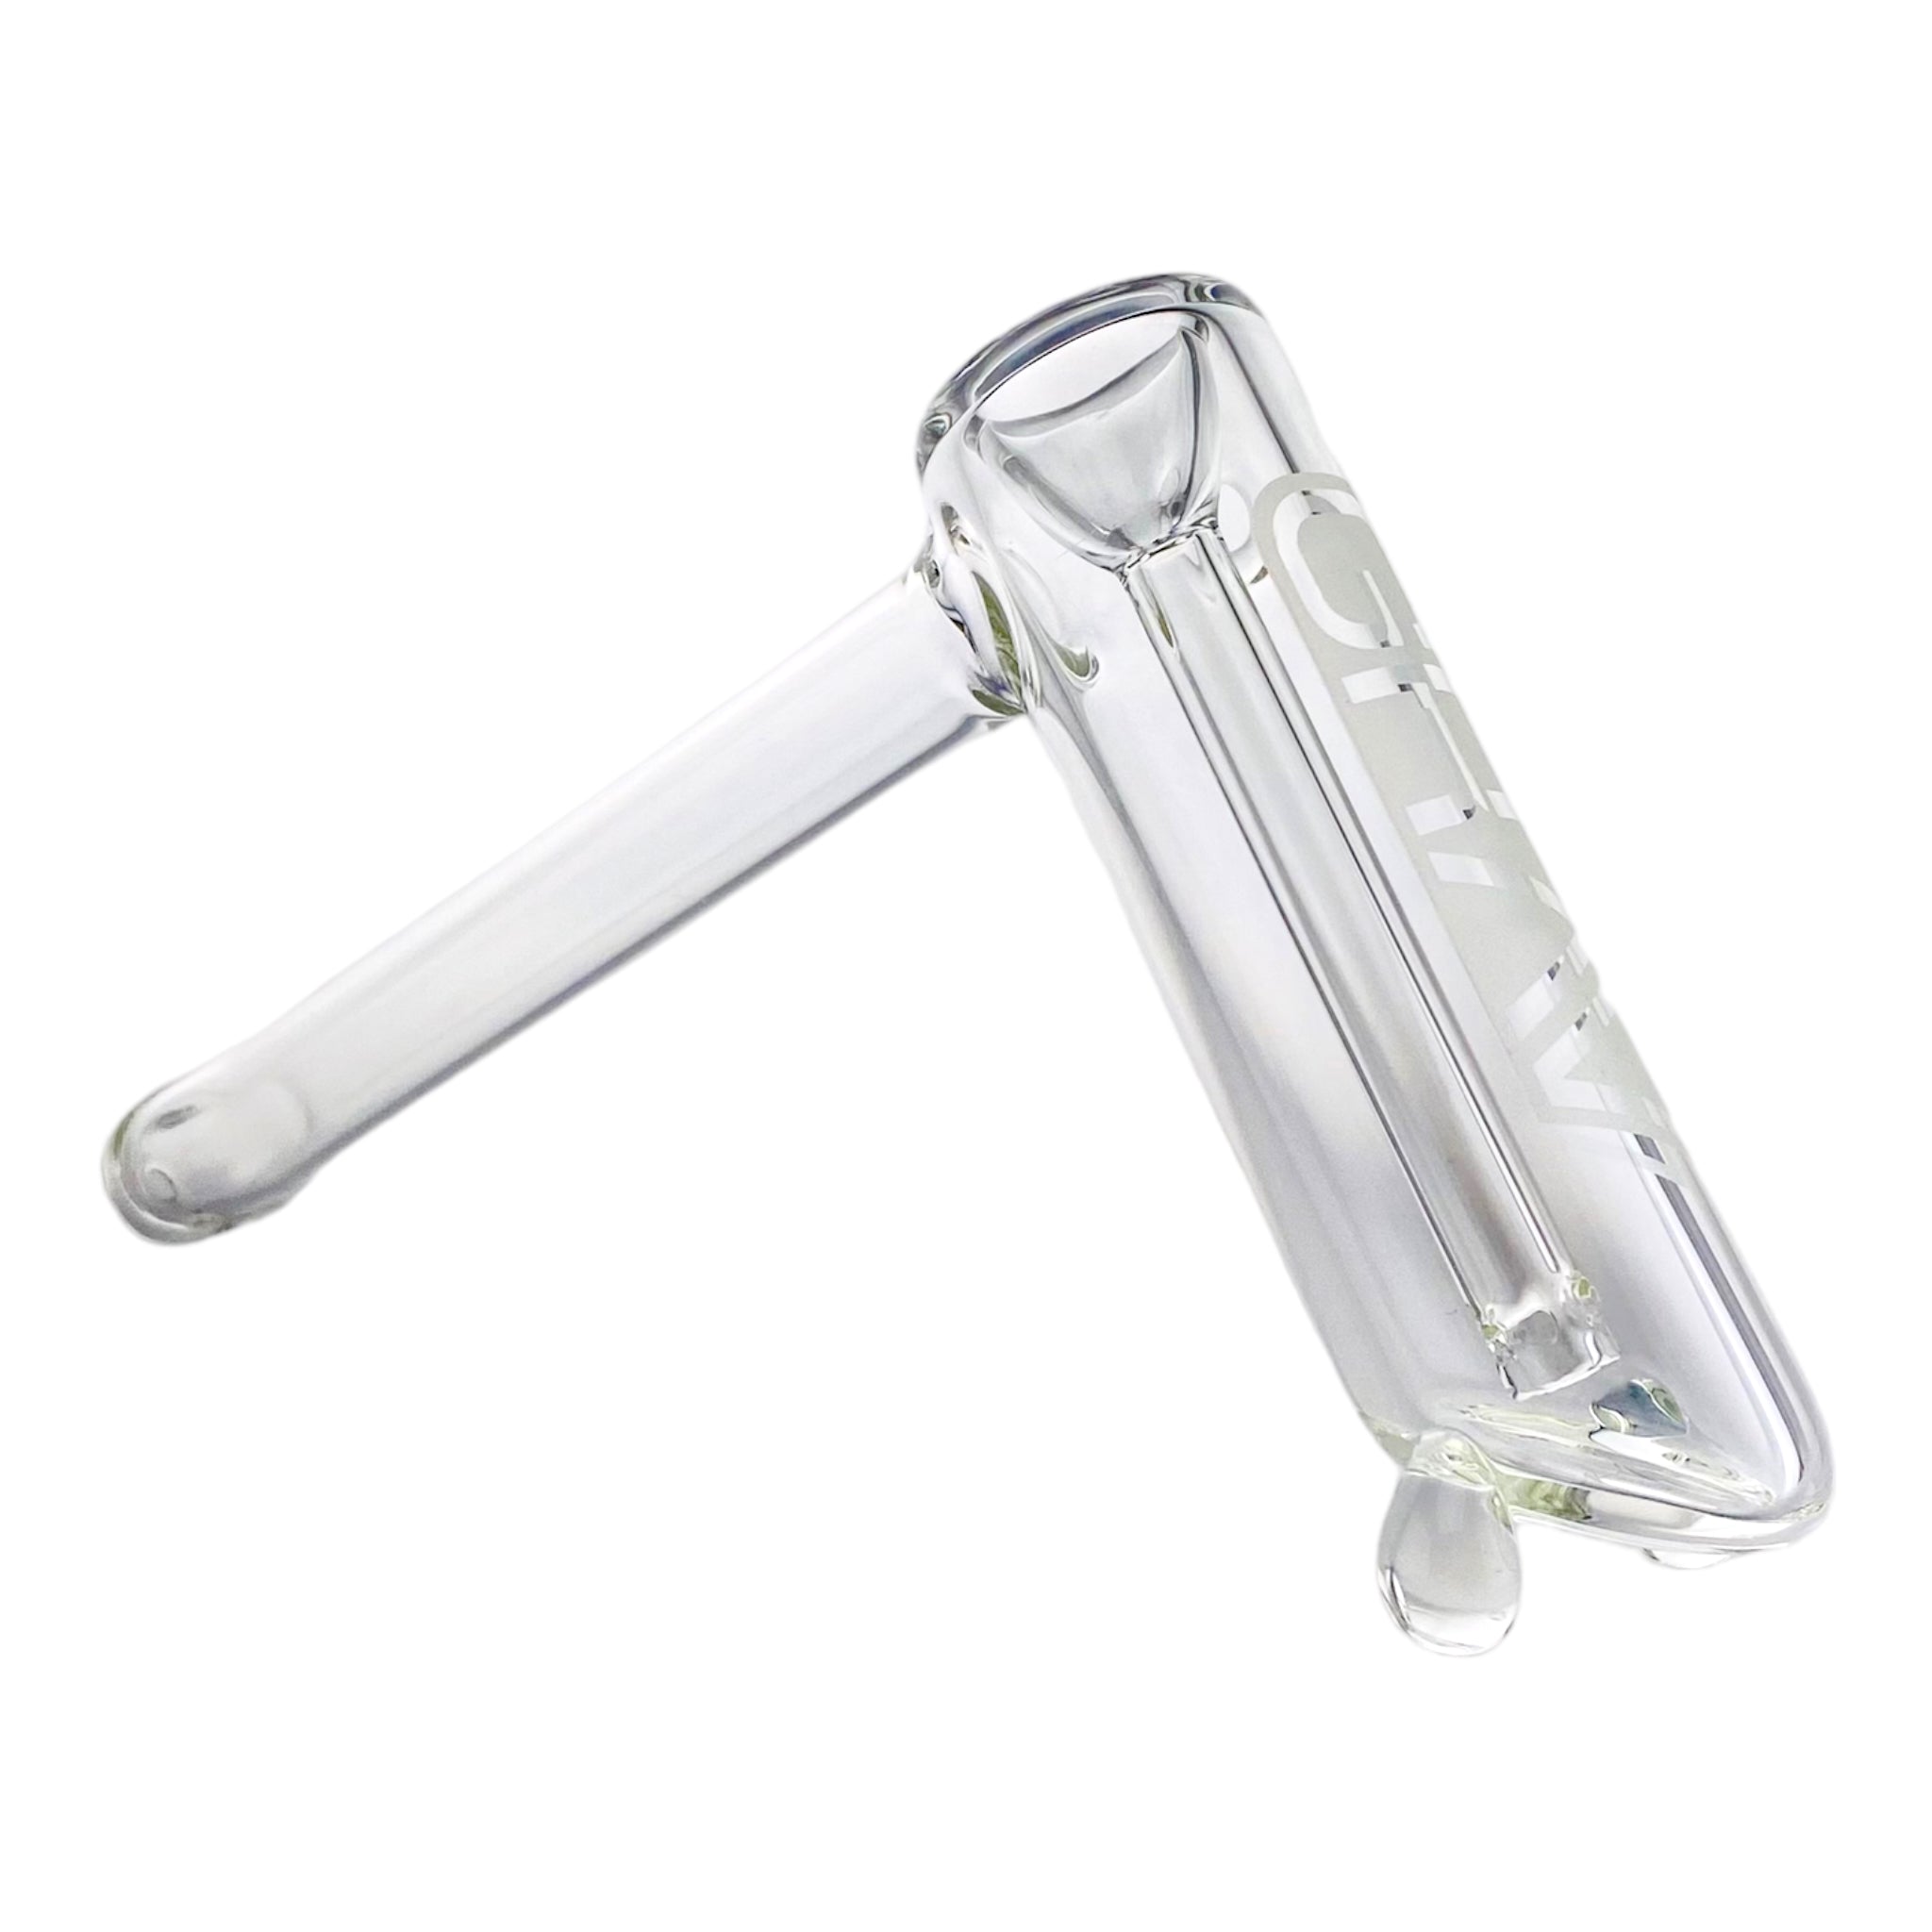 grav labs bubbler medium size with clear downstem and mouthpiece